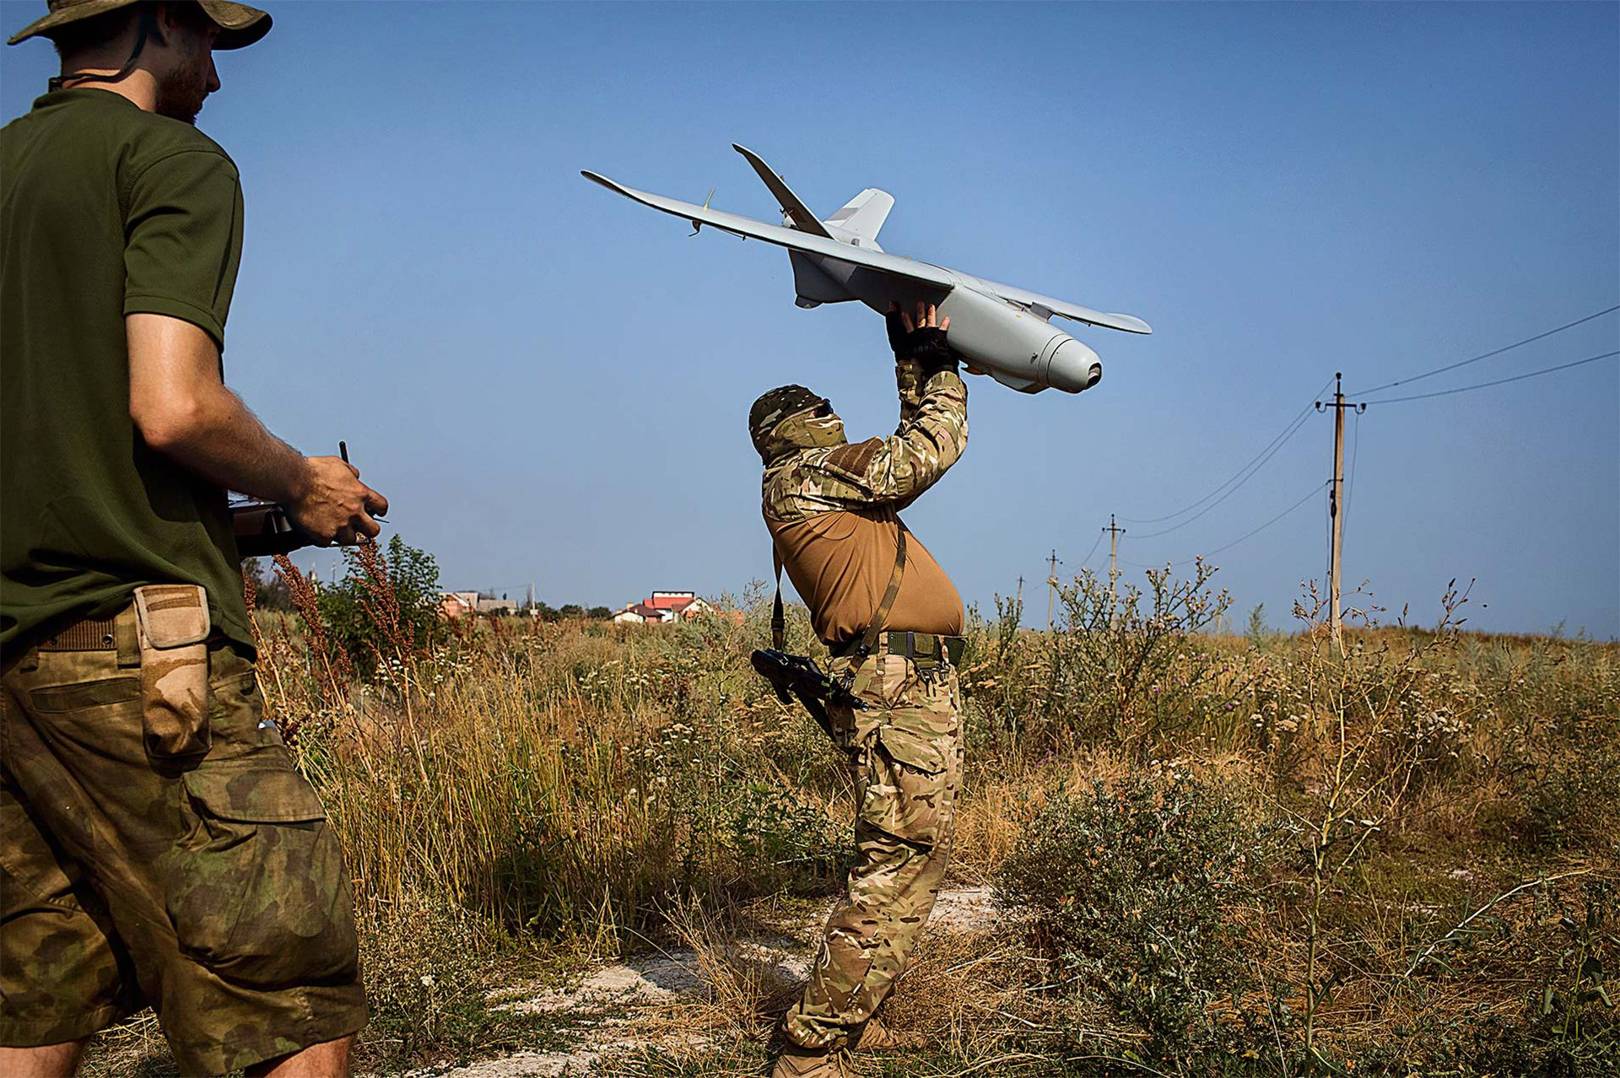 Game of drones: the warriors using high-street UAVs to fight the war in Ukraine